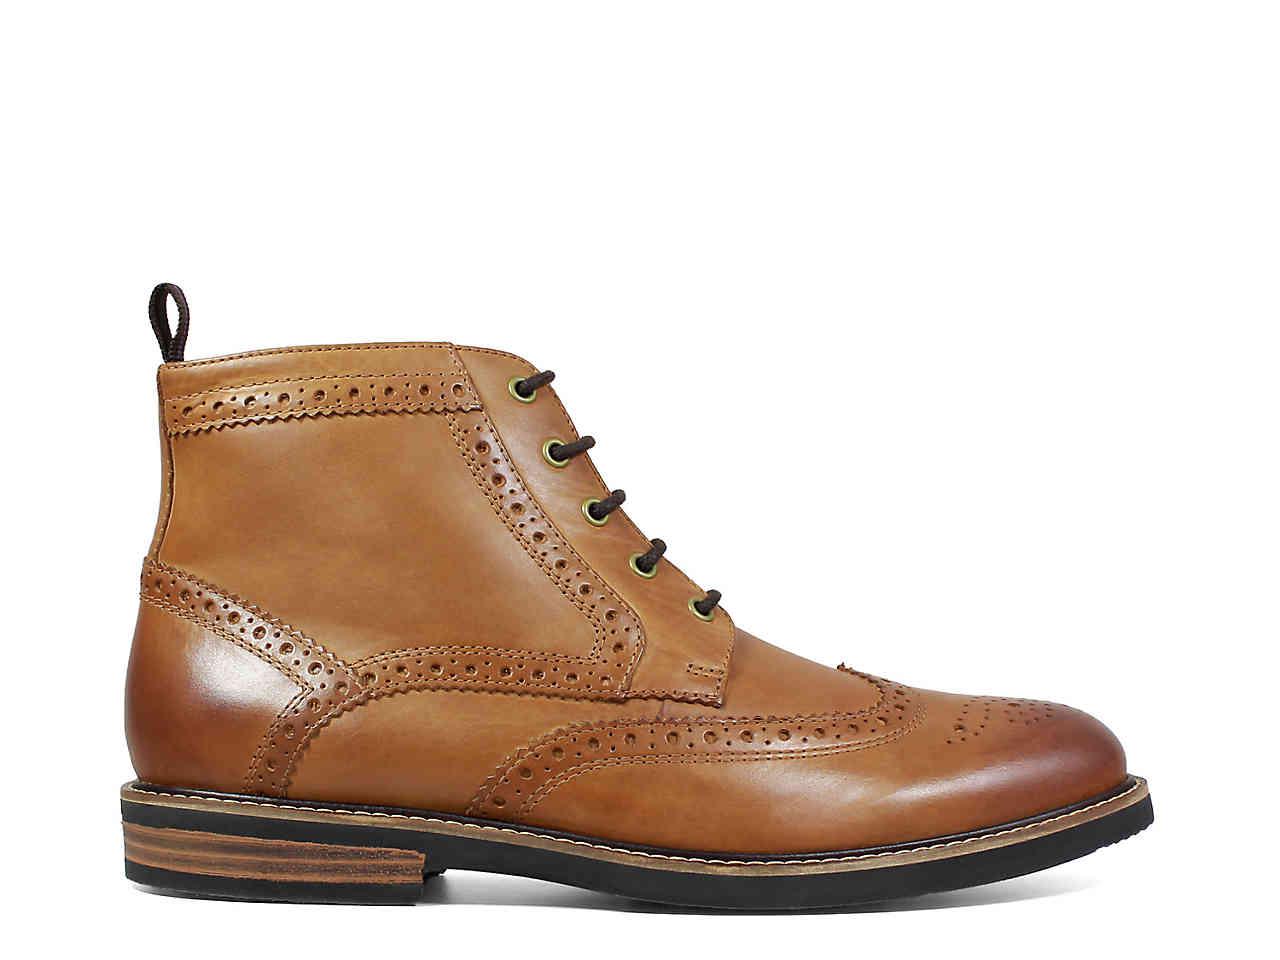 Nunn Bush Leather Odell Wingtip Boot in Tan (Brown) for Men - Lyst